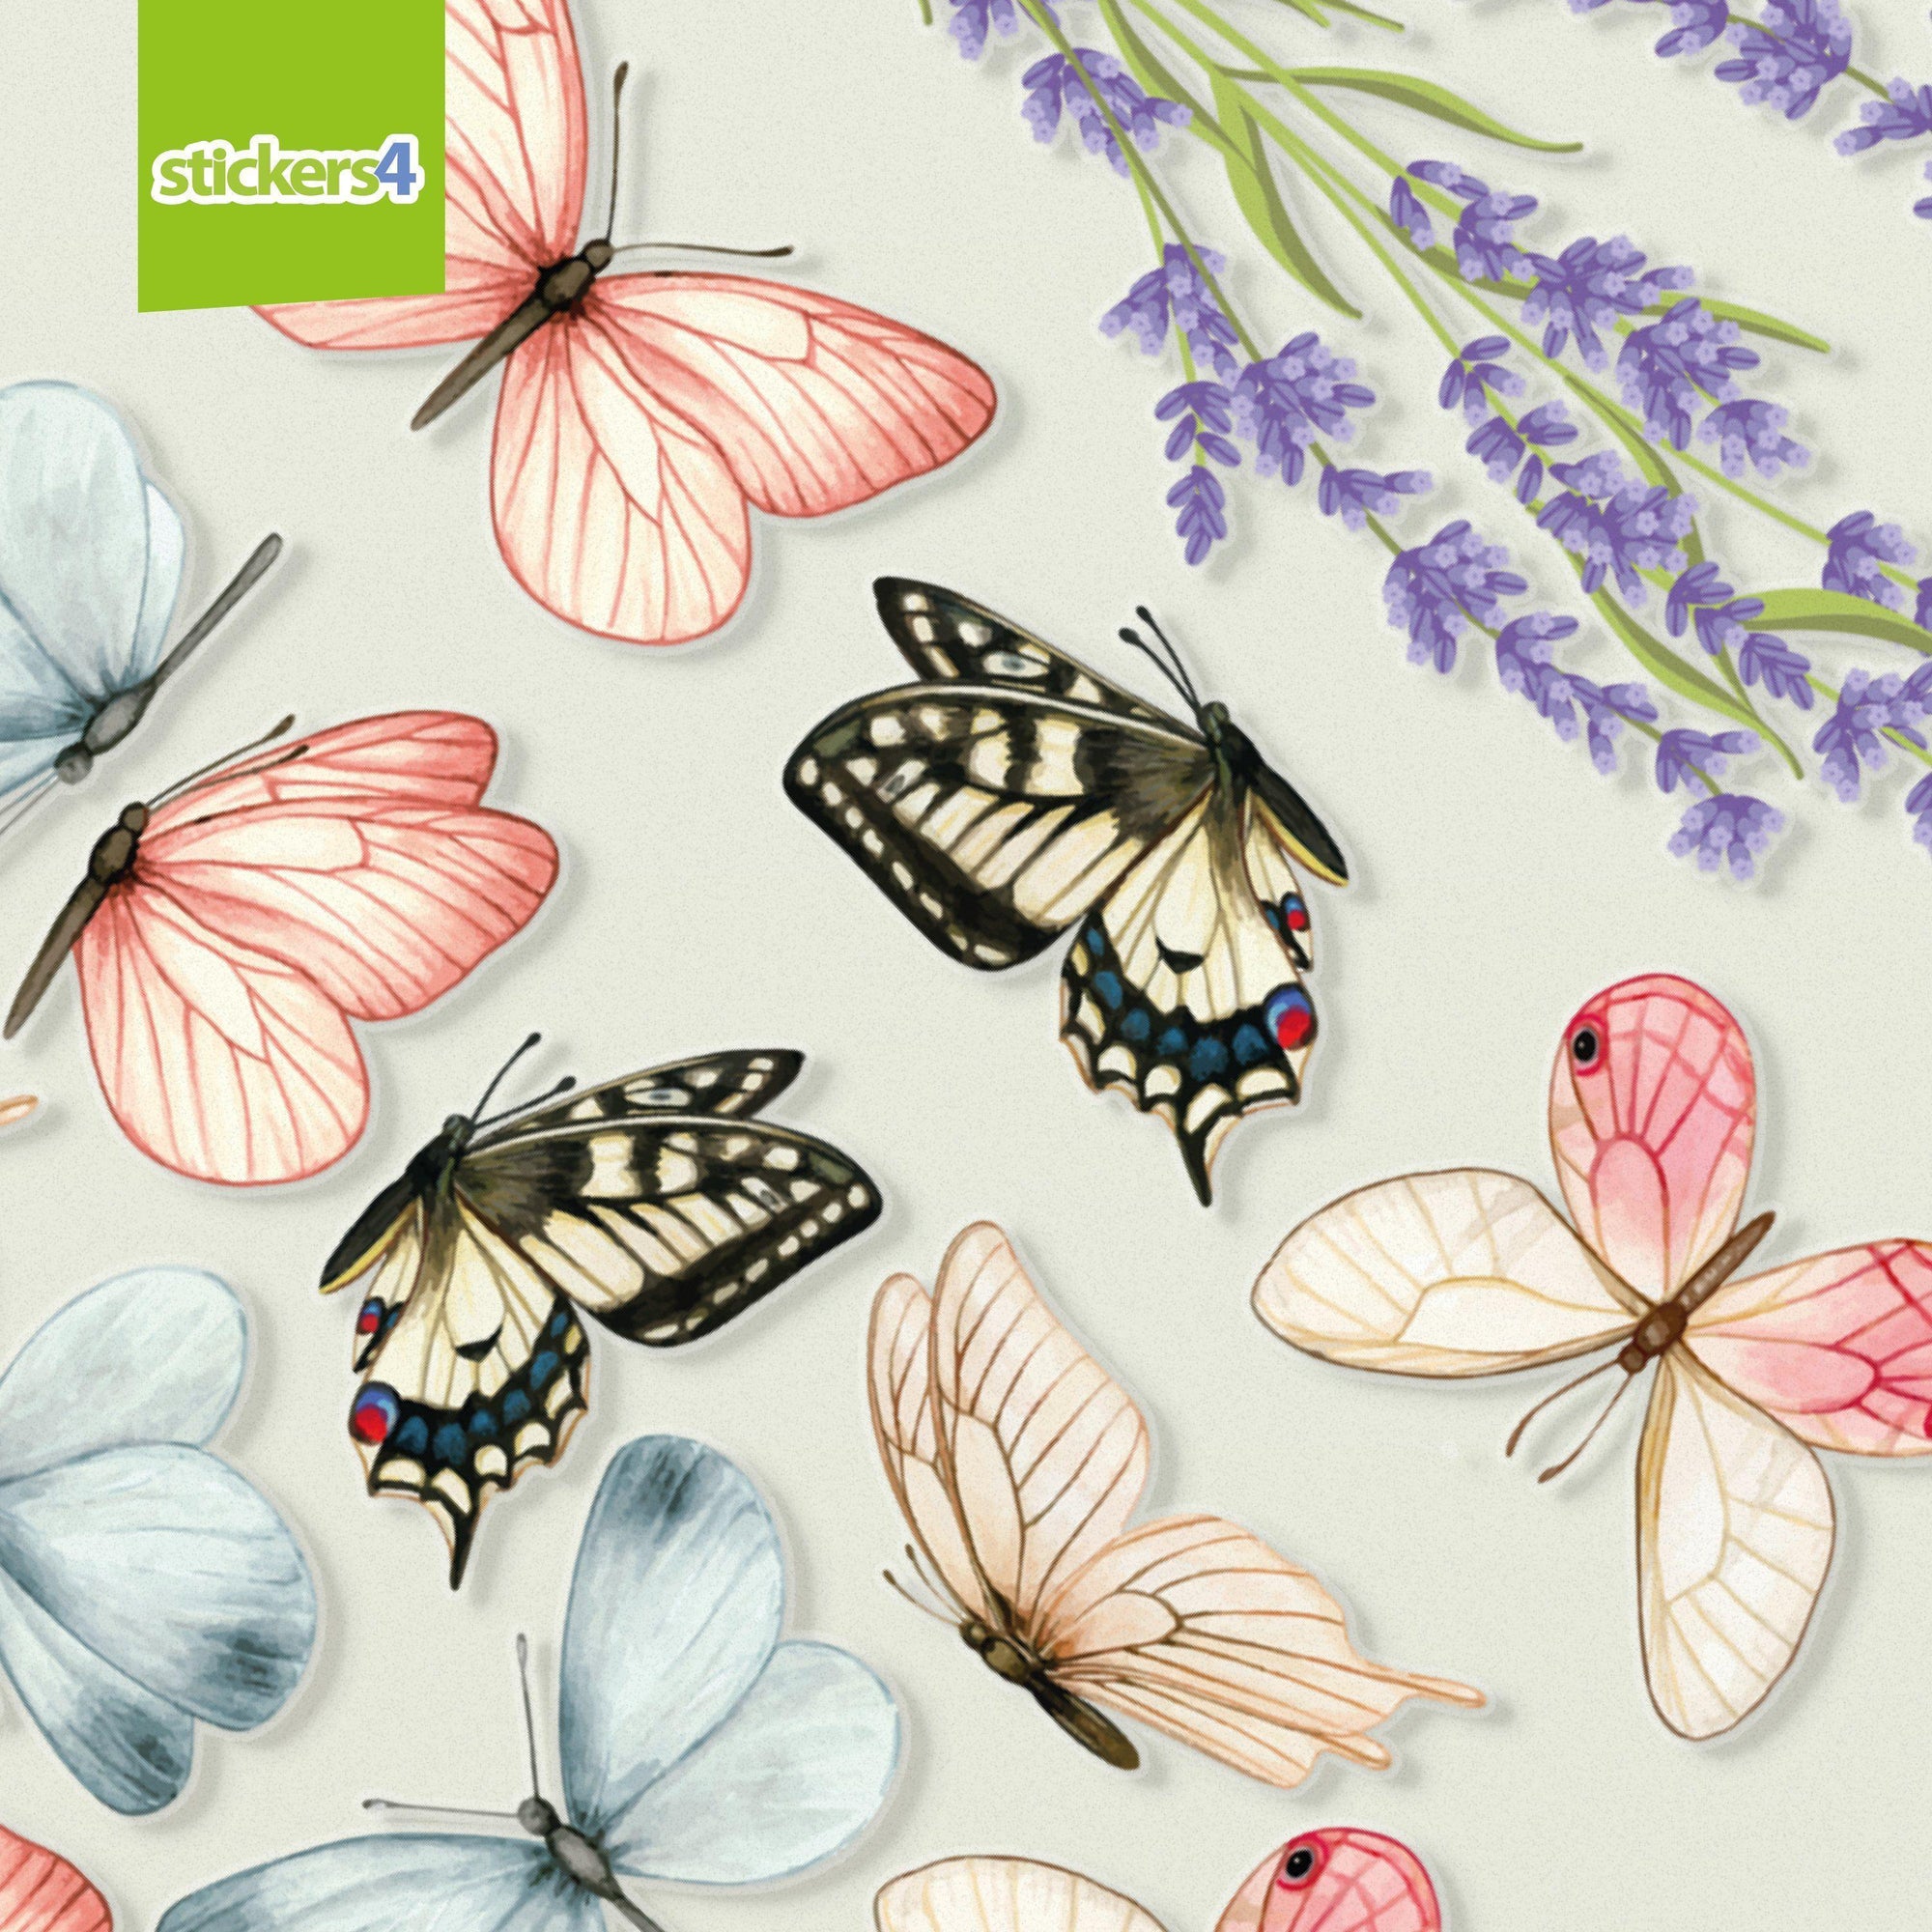 Butterfly & Lavender Laptop Stickers - 18x Removable Decals Laptop Sticker